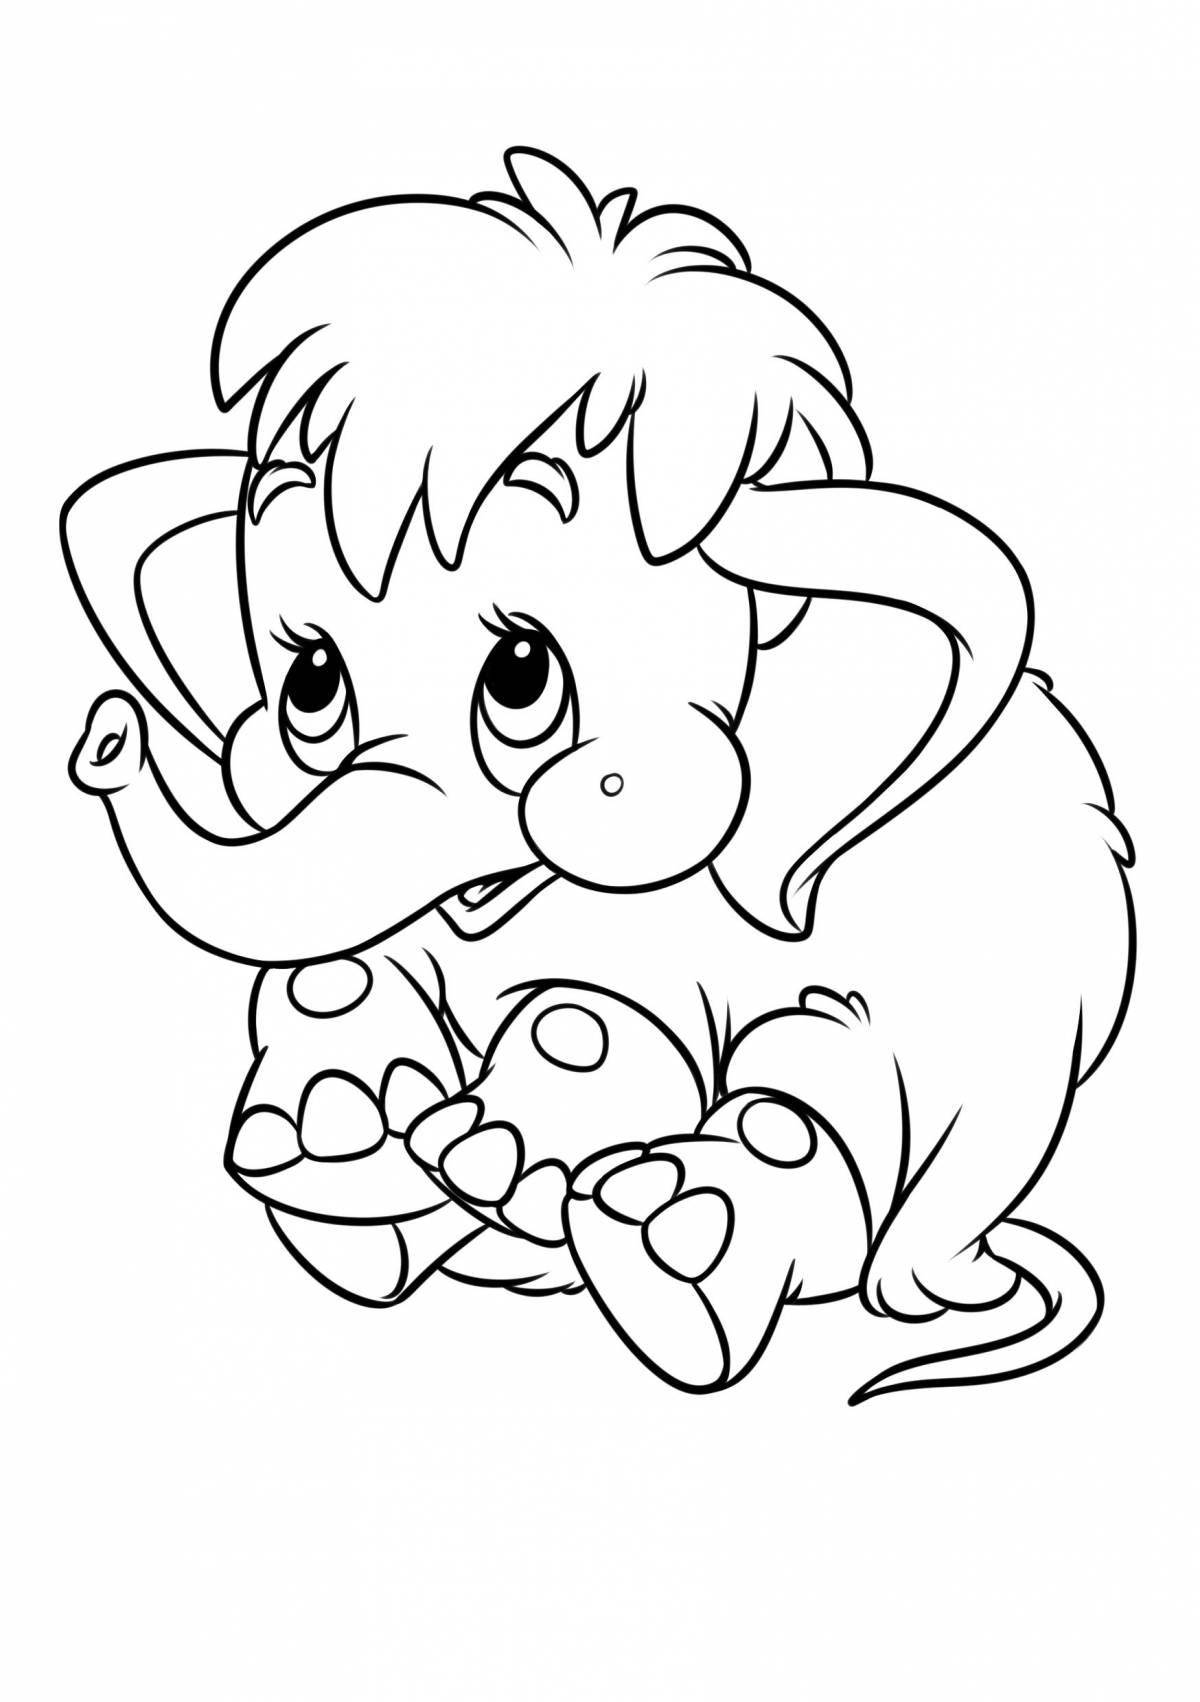 Shiny mammoth coloring page